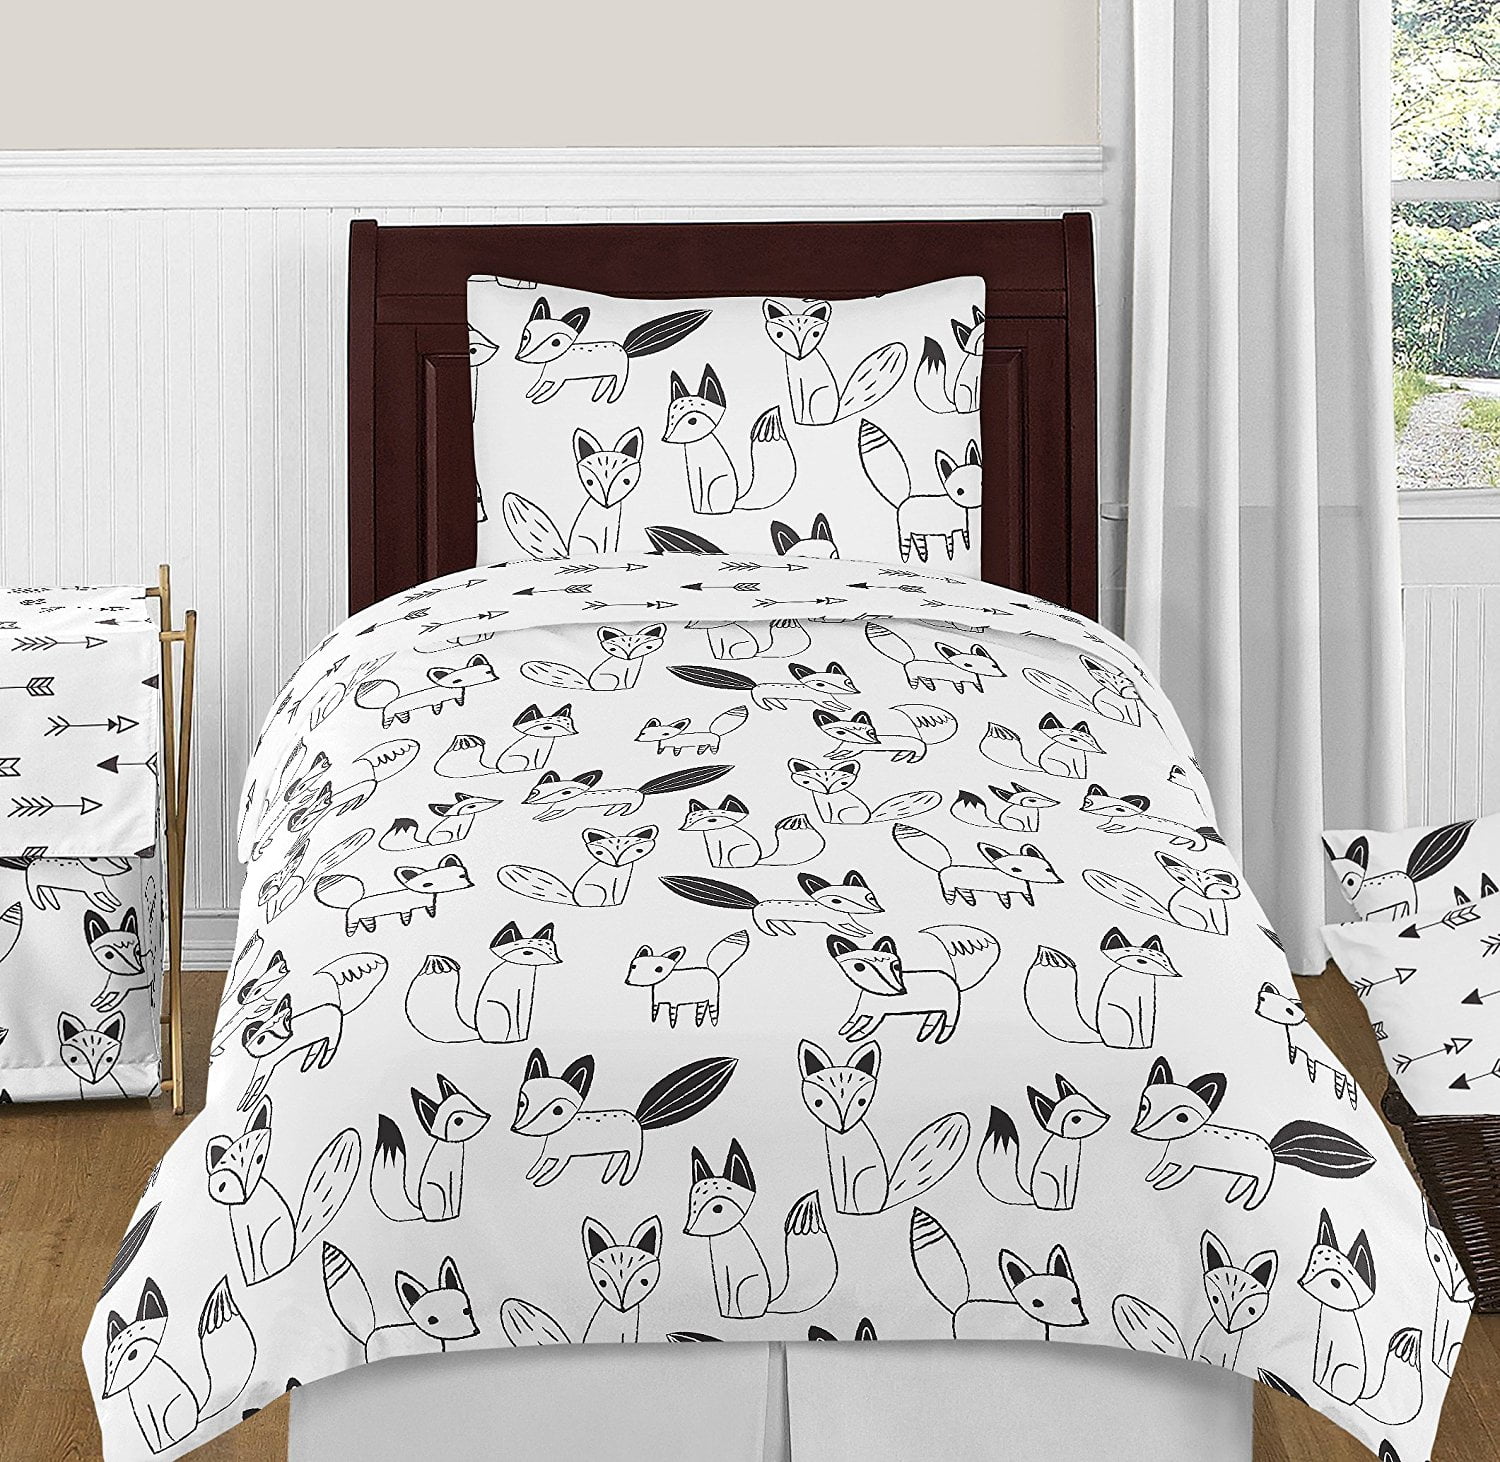 childrens twin bedding sets